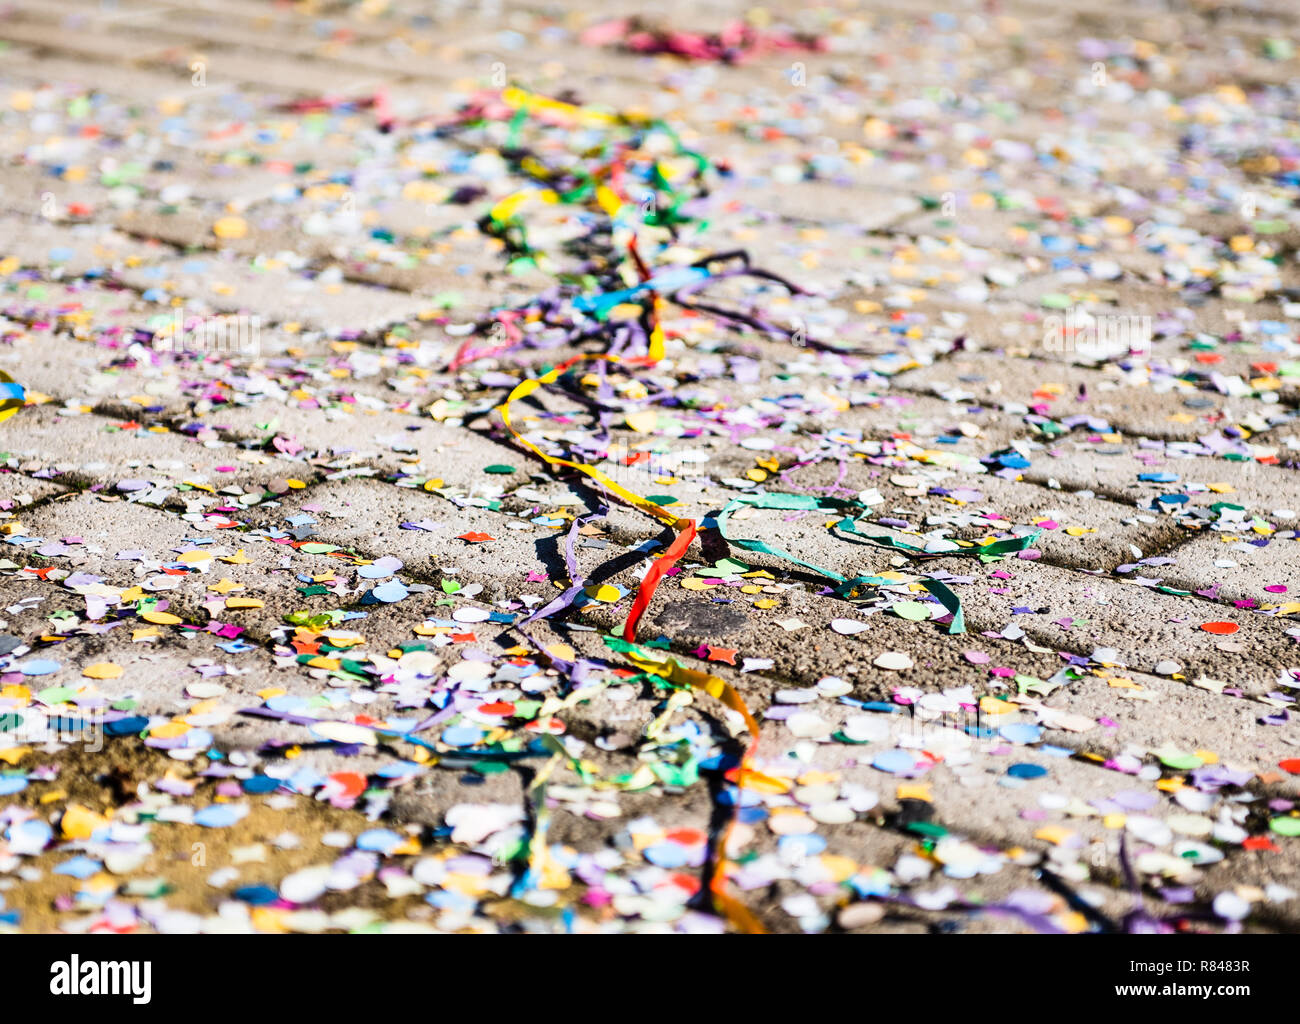 Close up on multicolored streamers wacky strings abandoned on the ground, no people selective focus Stock Photo